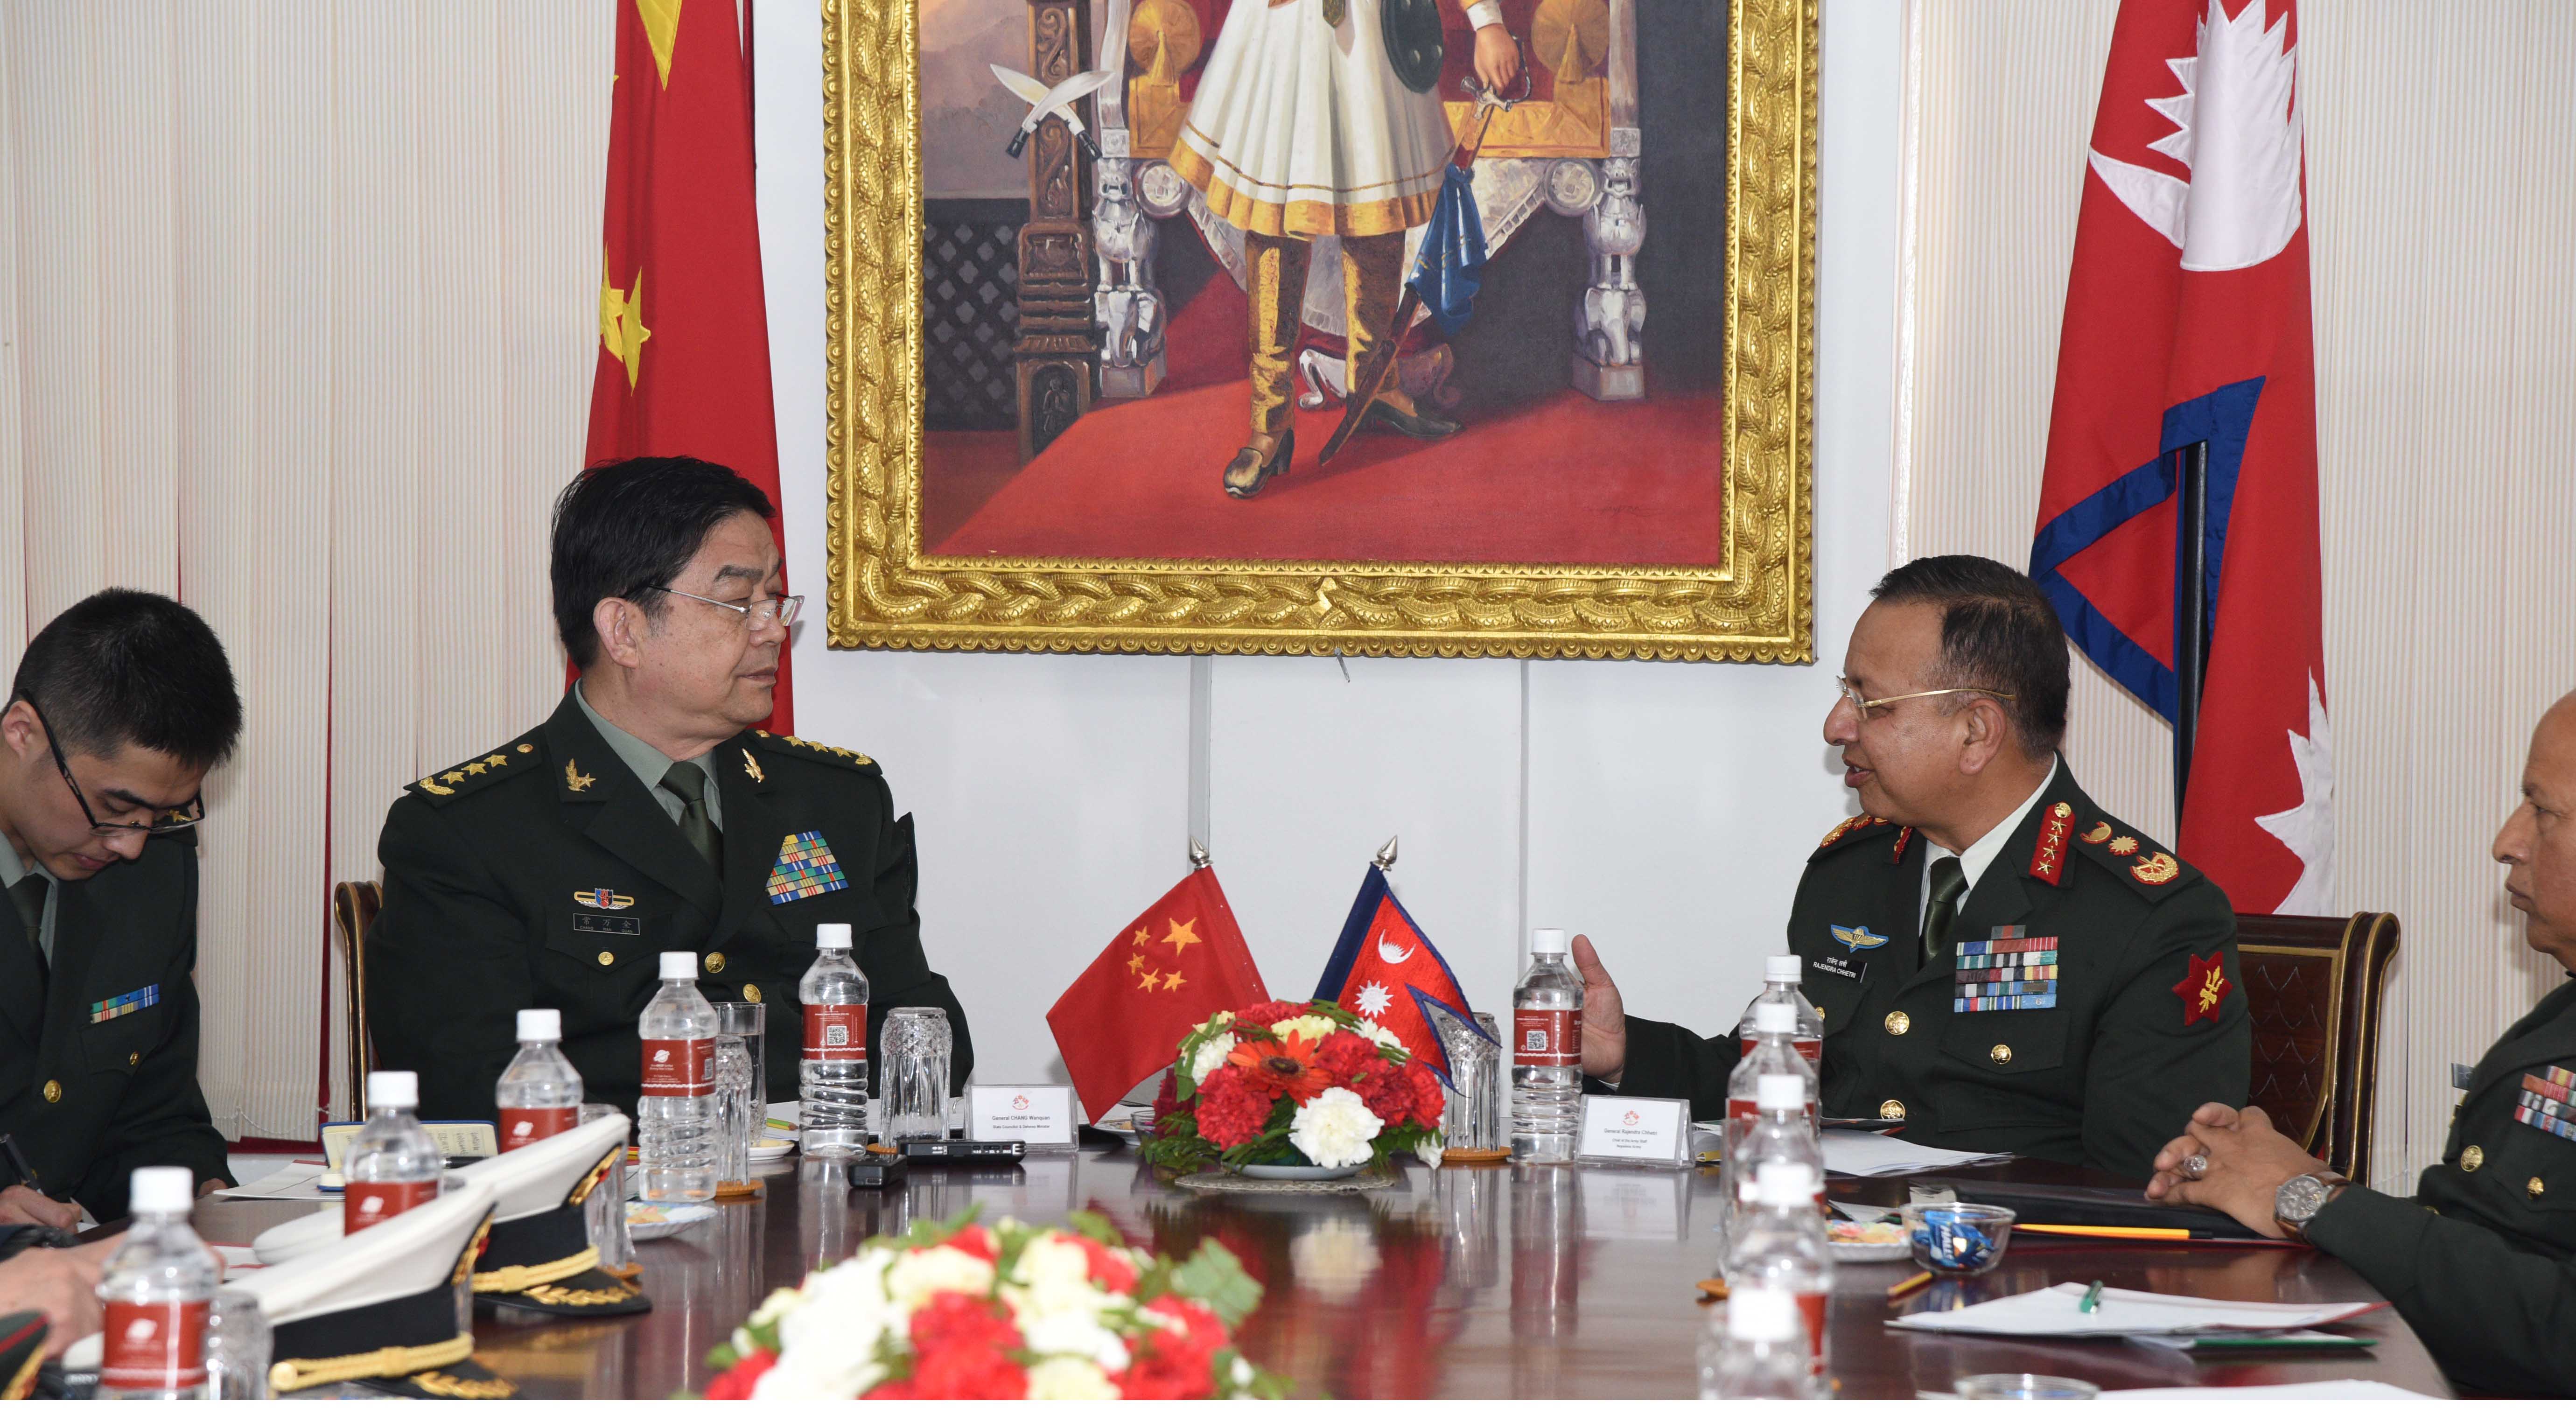 Meeting between Chang and CoAS concludes